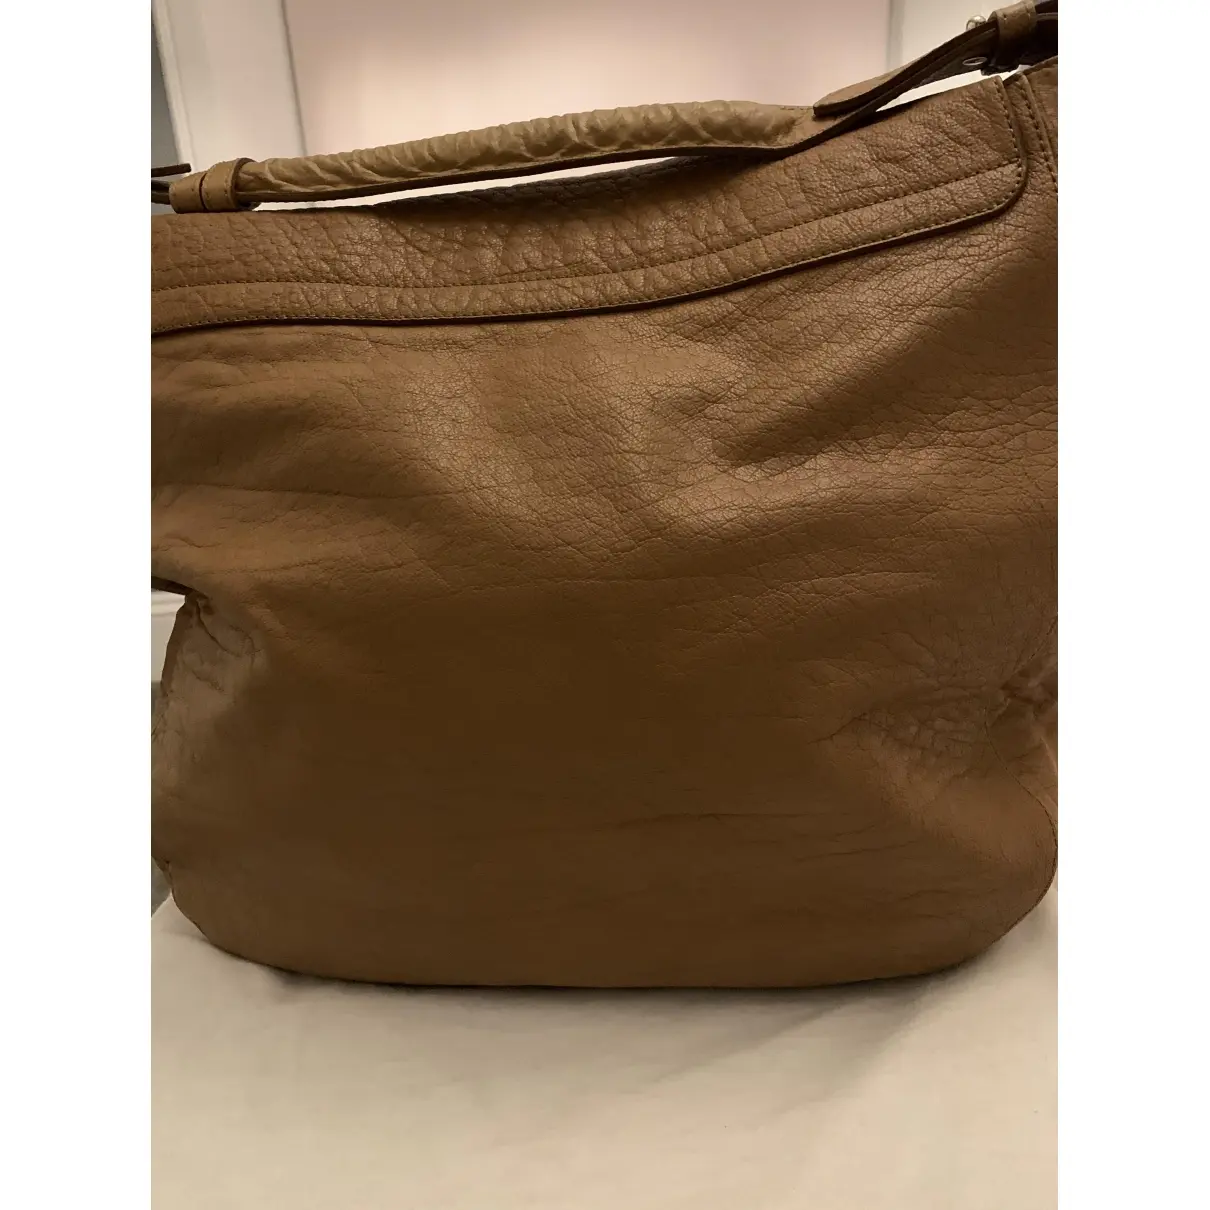 Mulberry Leather handbag for sale